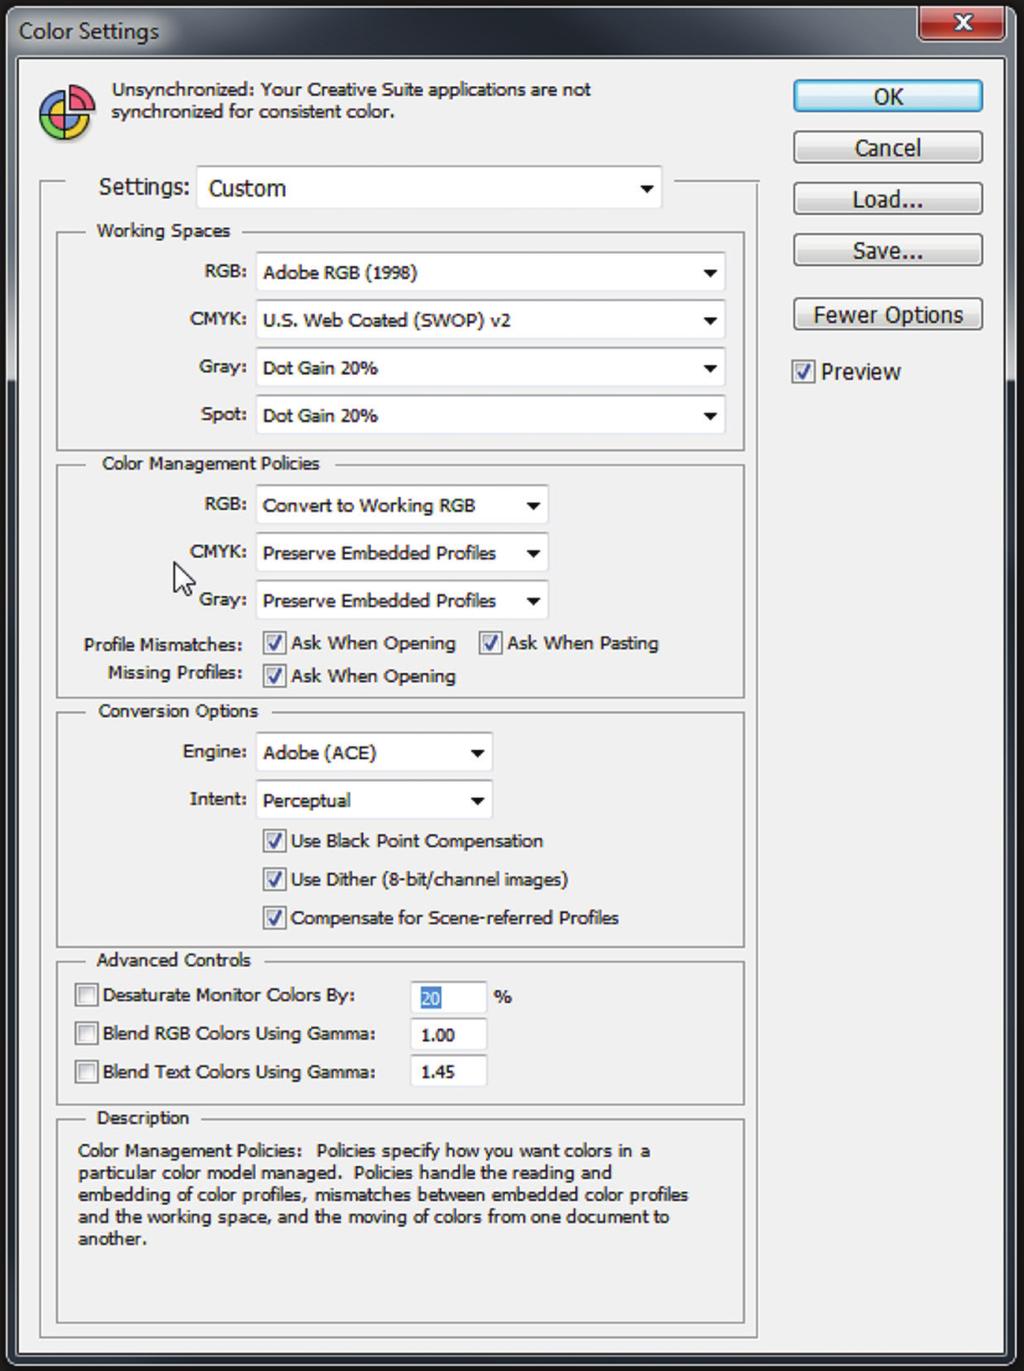 rtainium UV + : Epson rtisan 1430 2) In the olor Settings window that opens, match your settings to those shown below (see FIGURE 2). S D E P K F G I H J L M N O FIGURE 2. Settings: ustom.